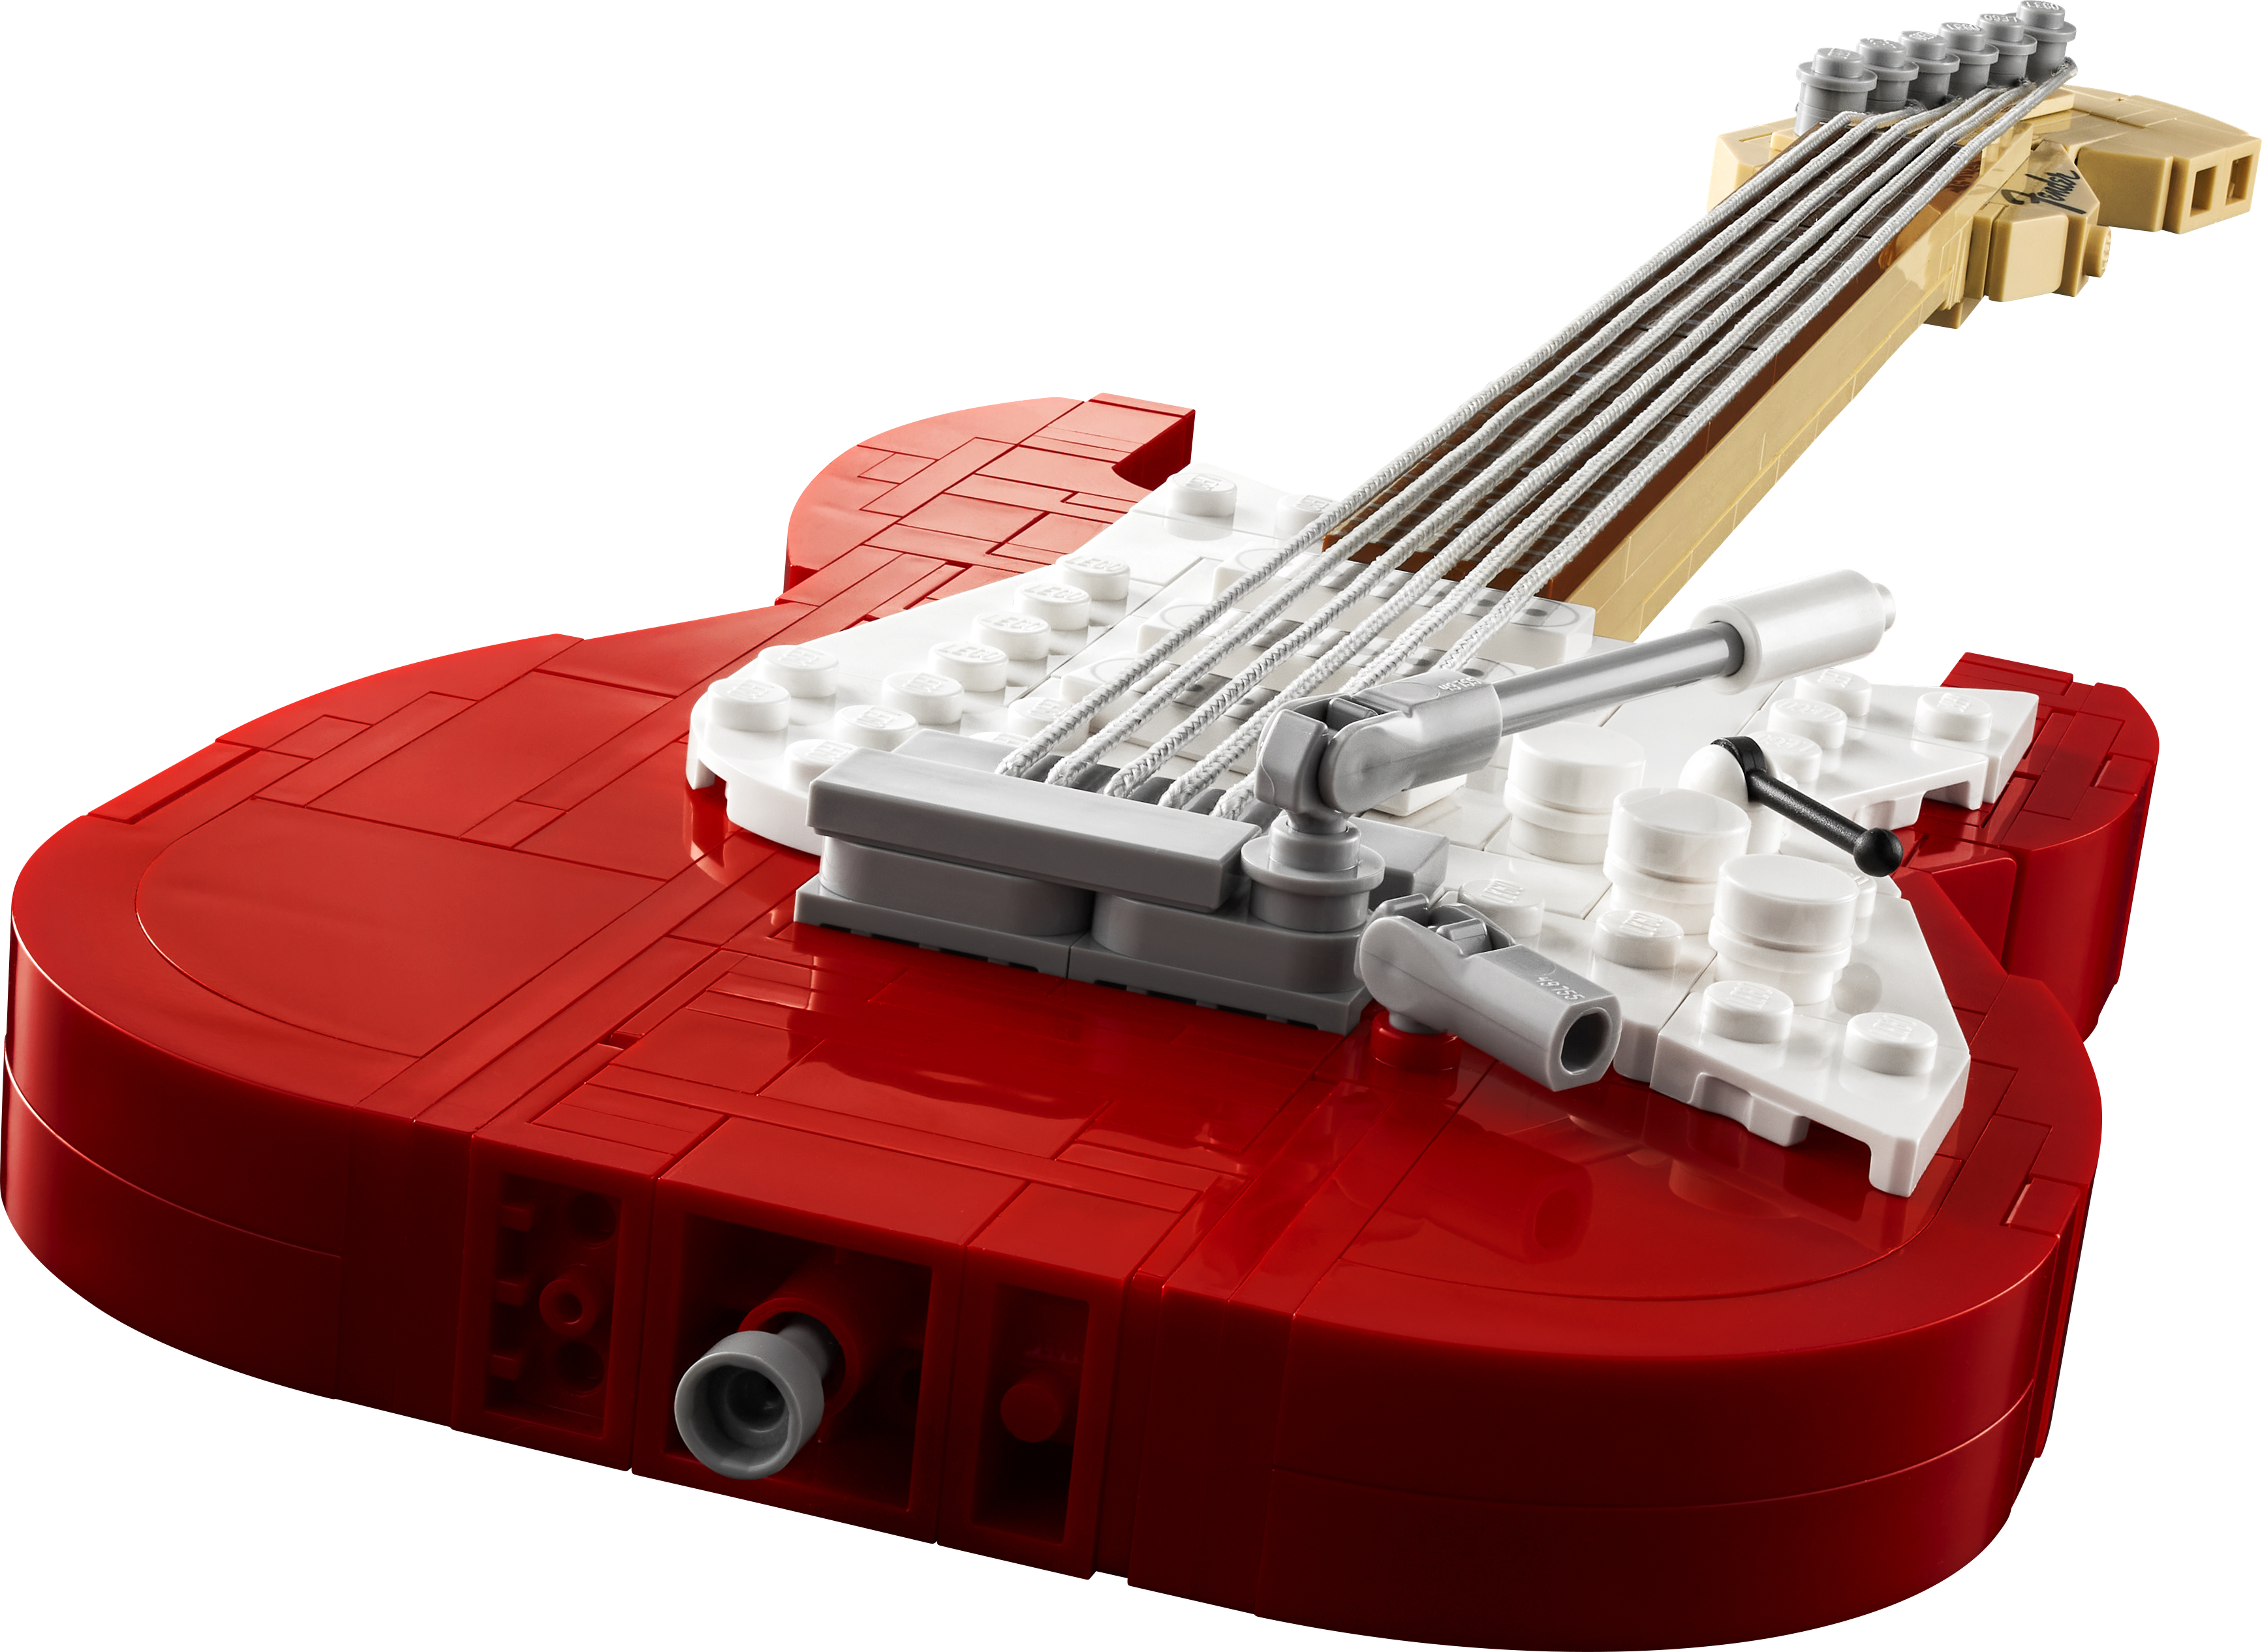 Display King - Acrylic display plaque for Lego Fender Stratocaster 21329  (NEW)